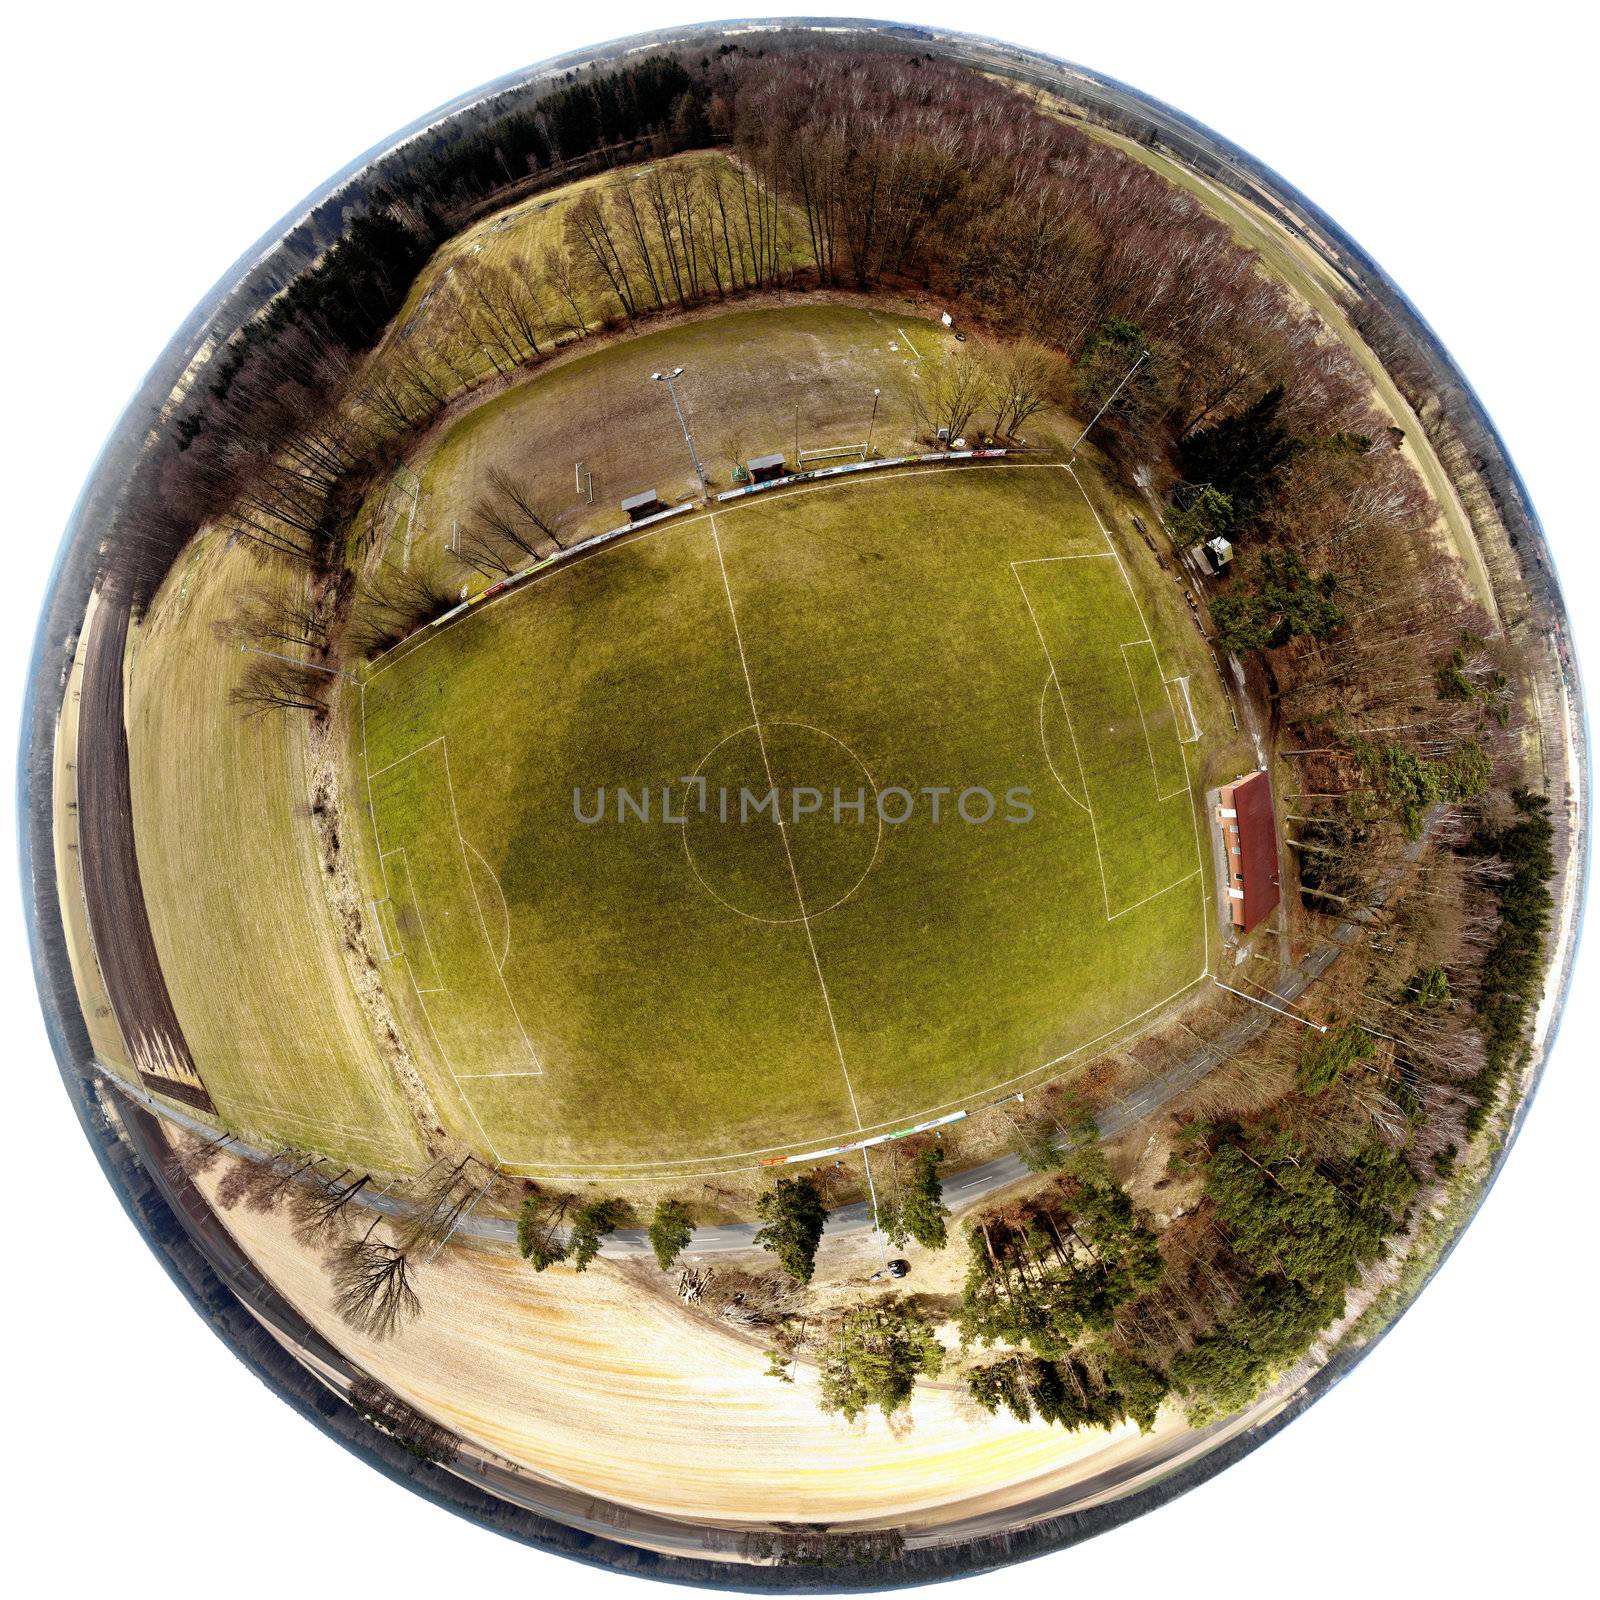 Spherical panorama from composite aerial photos of a football field in a village in the heath by geogif